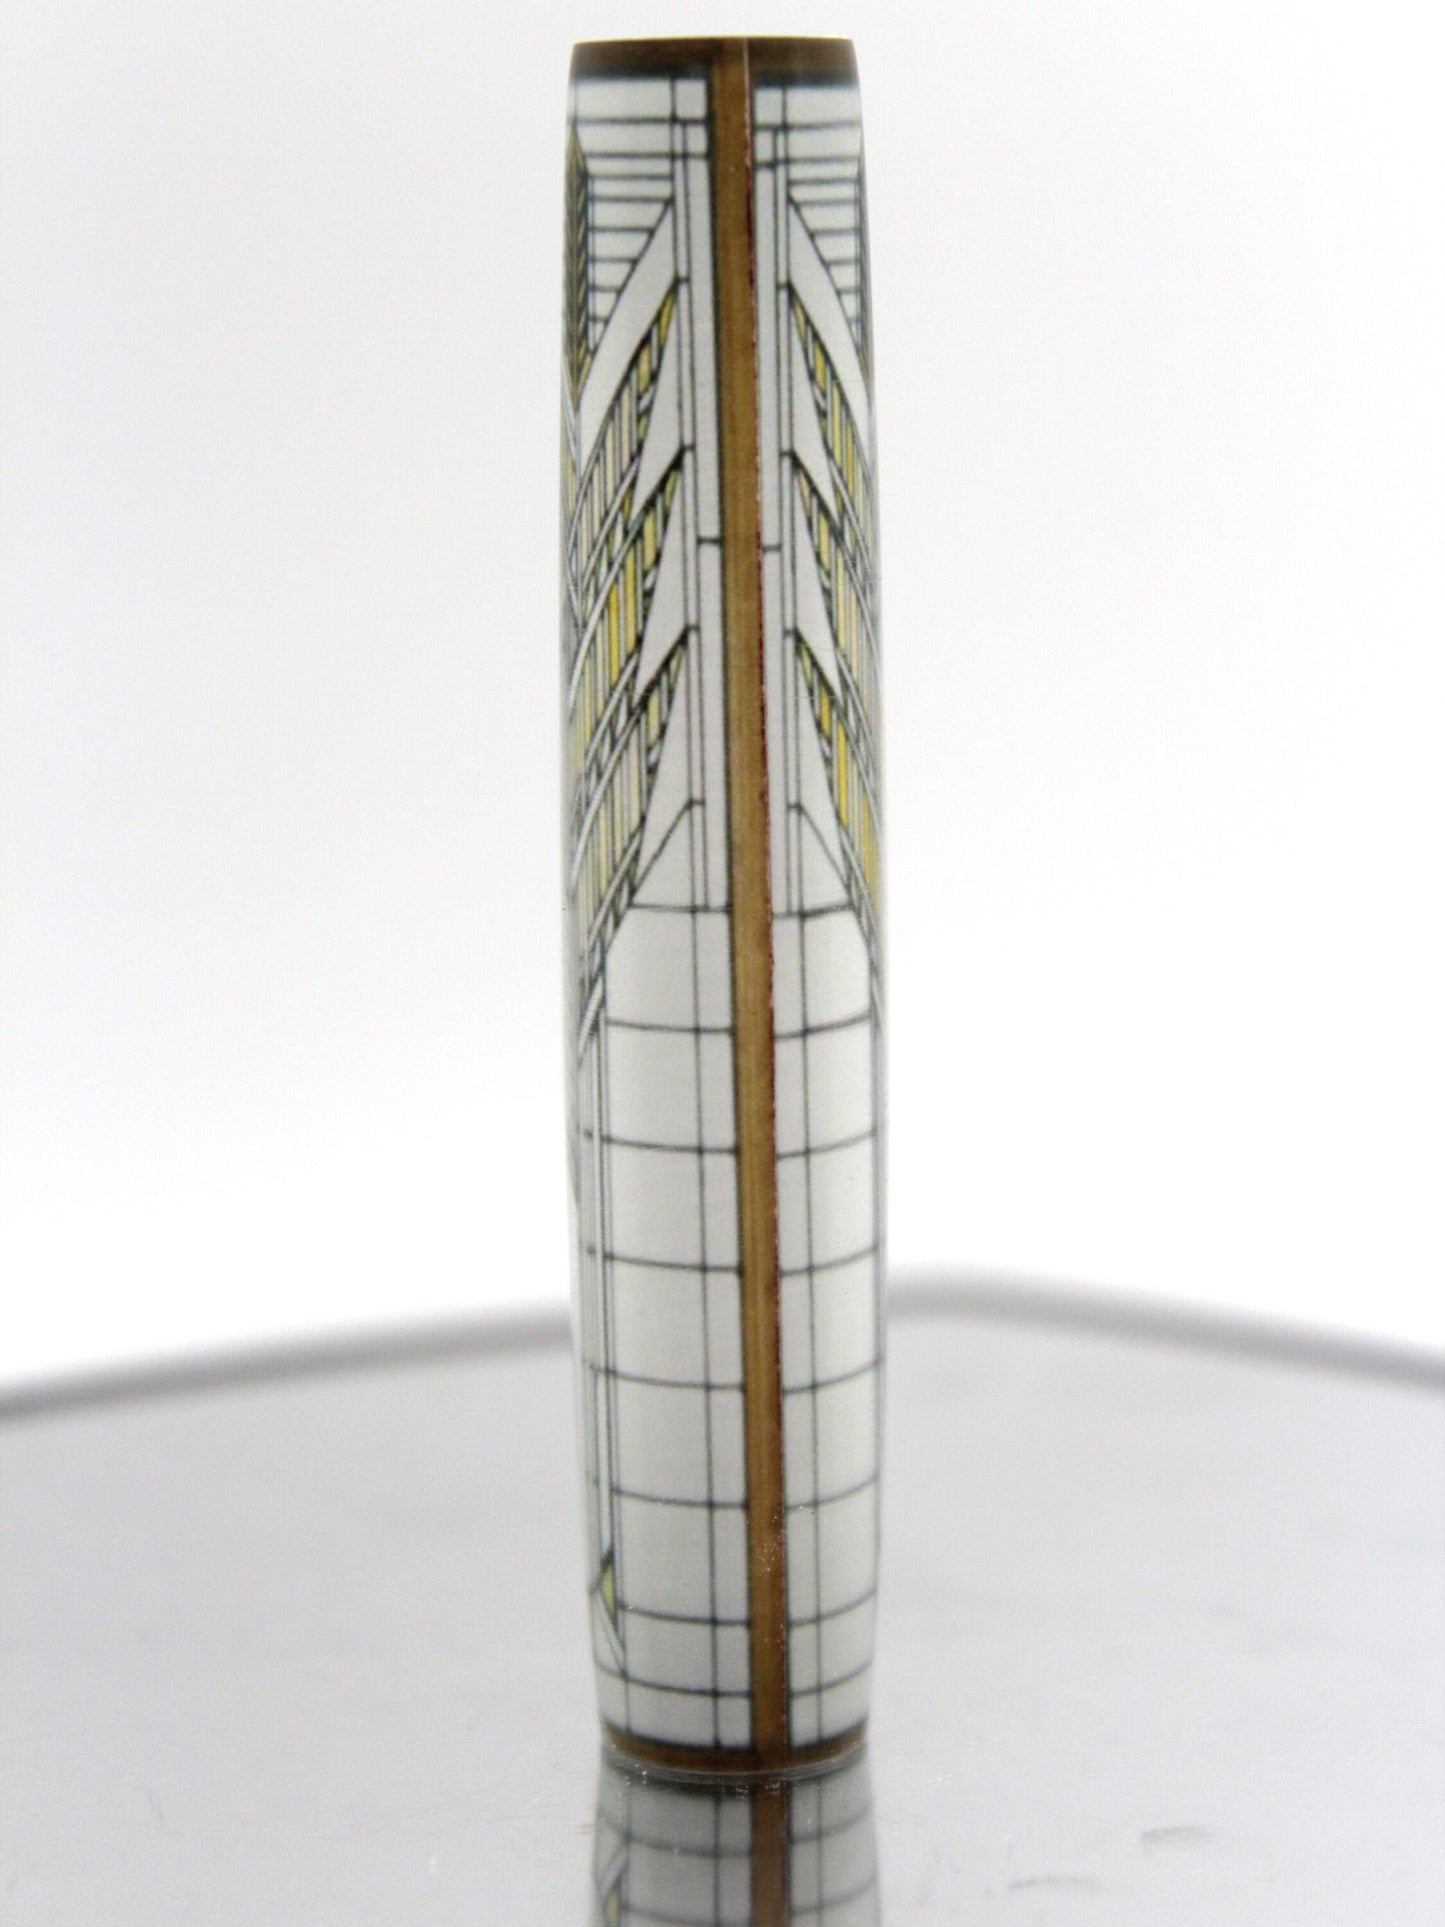 Frank Lloyd Wright Inspired - Sheaves of Wheat Stained Glass Resin Cast Pen Blank - Arts & Craft Style - Mission Style